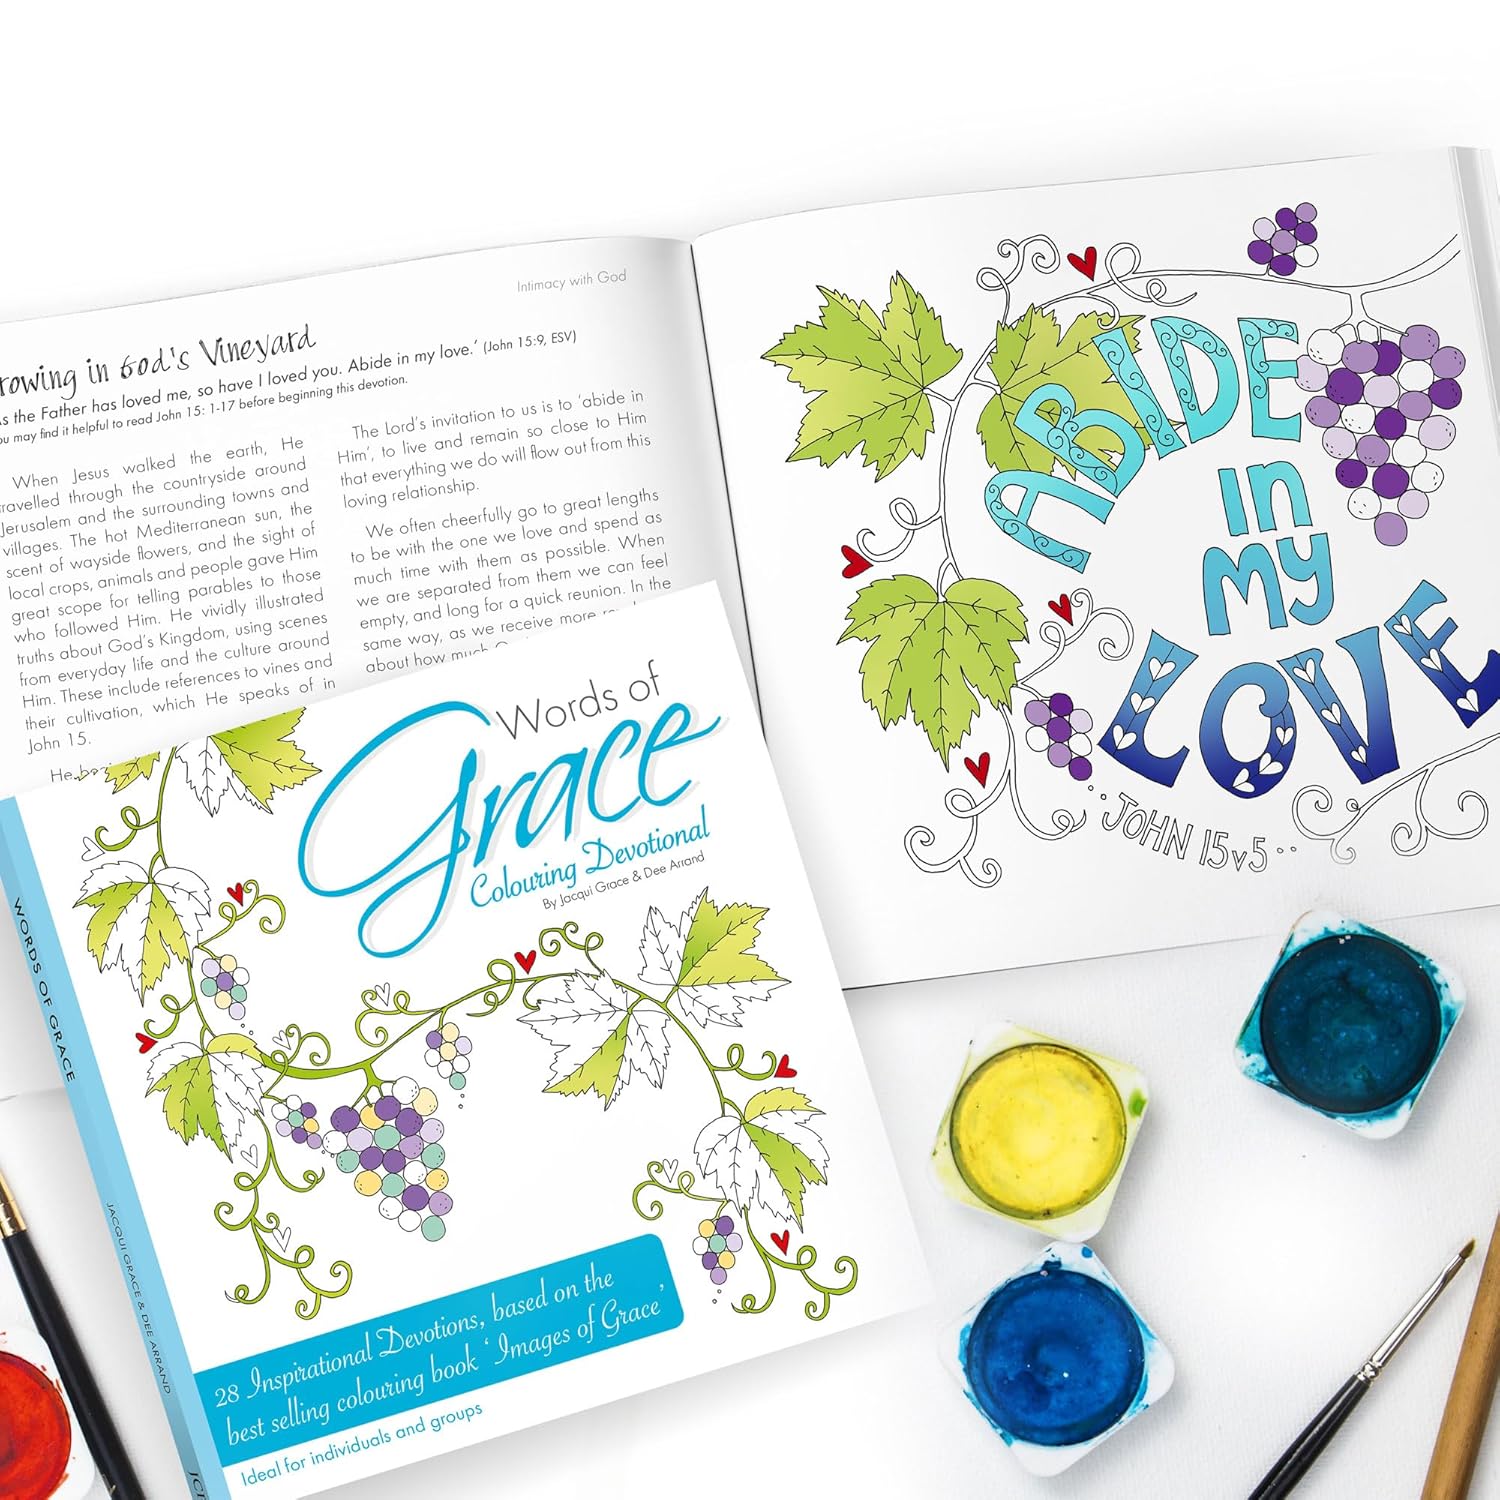 Words of Grace: A Colouring Devotional